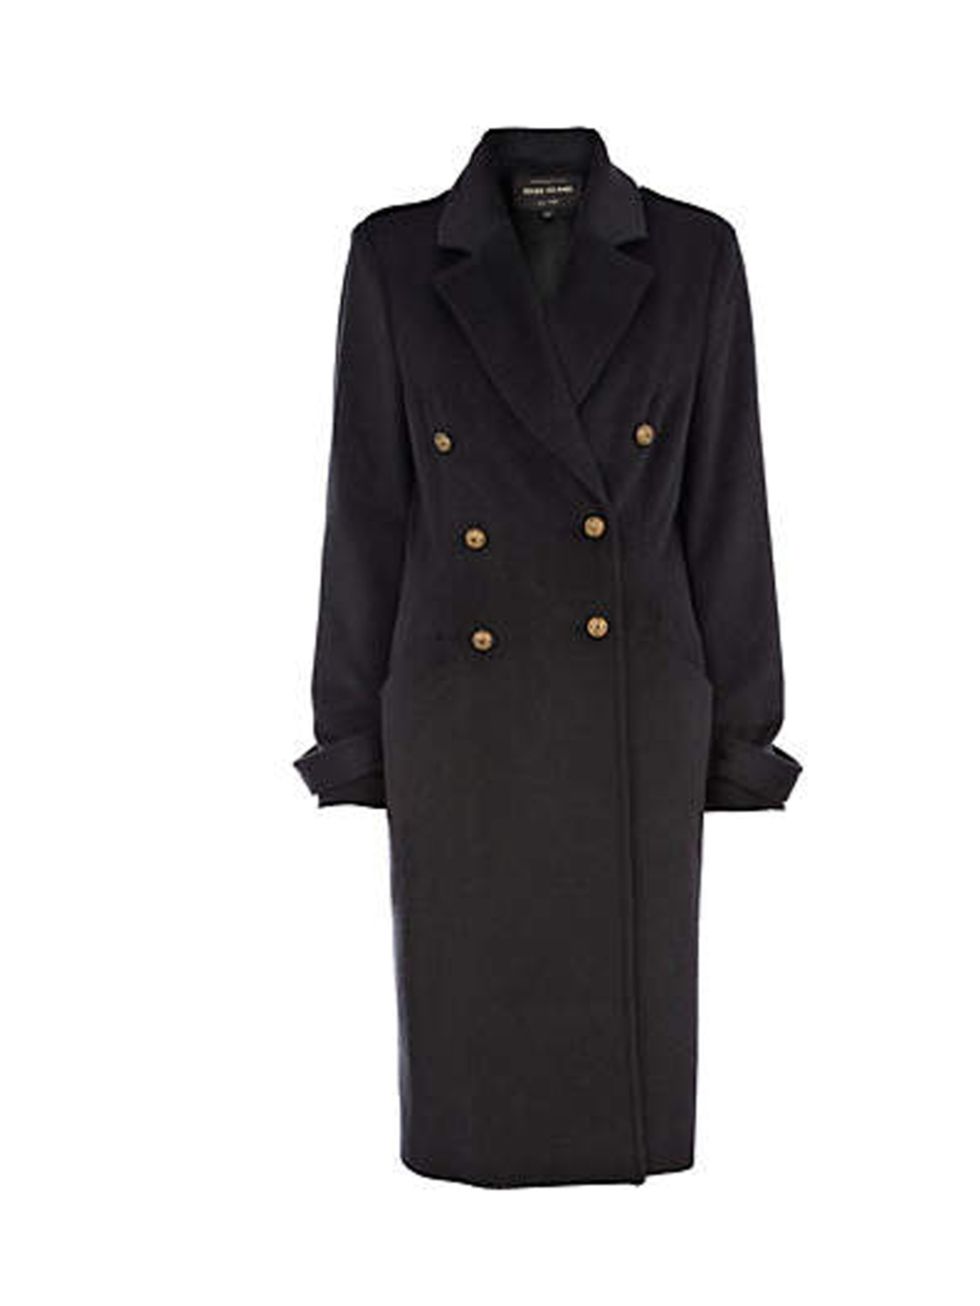 <p>Take your cue from the catwalk and layer a mannish military coat over leather trousers and a luxe roll neck  finish with heels and clutch, naturally <a href="http://www.riverisland.com/women/coats--jackets/coats/Black-military-maxi-coat-632216">River